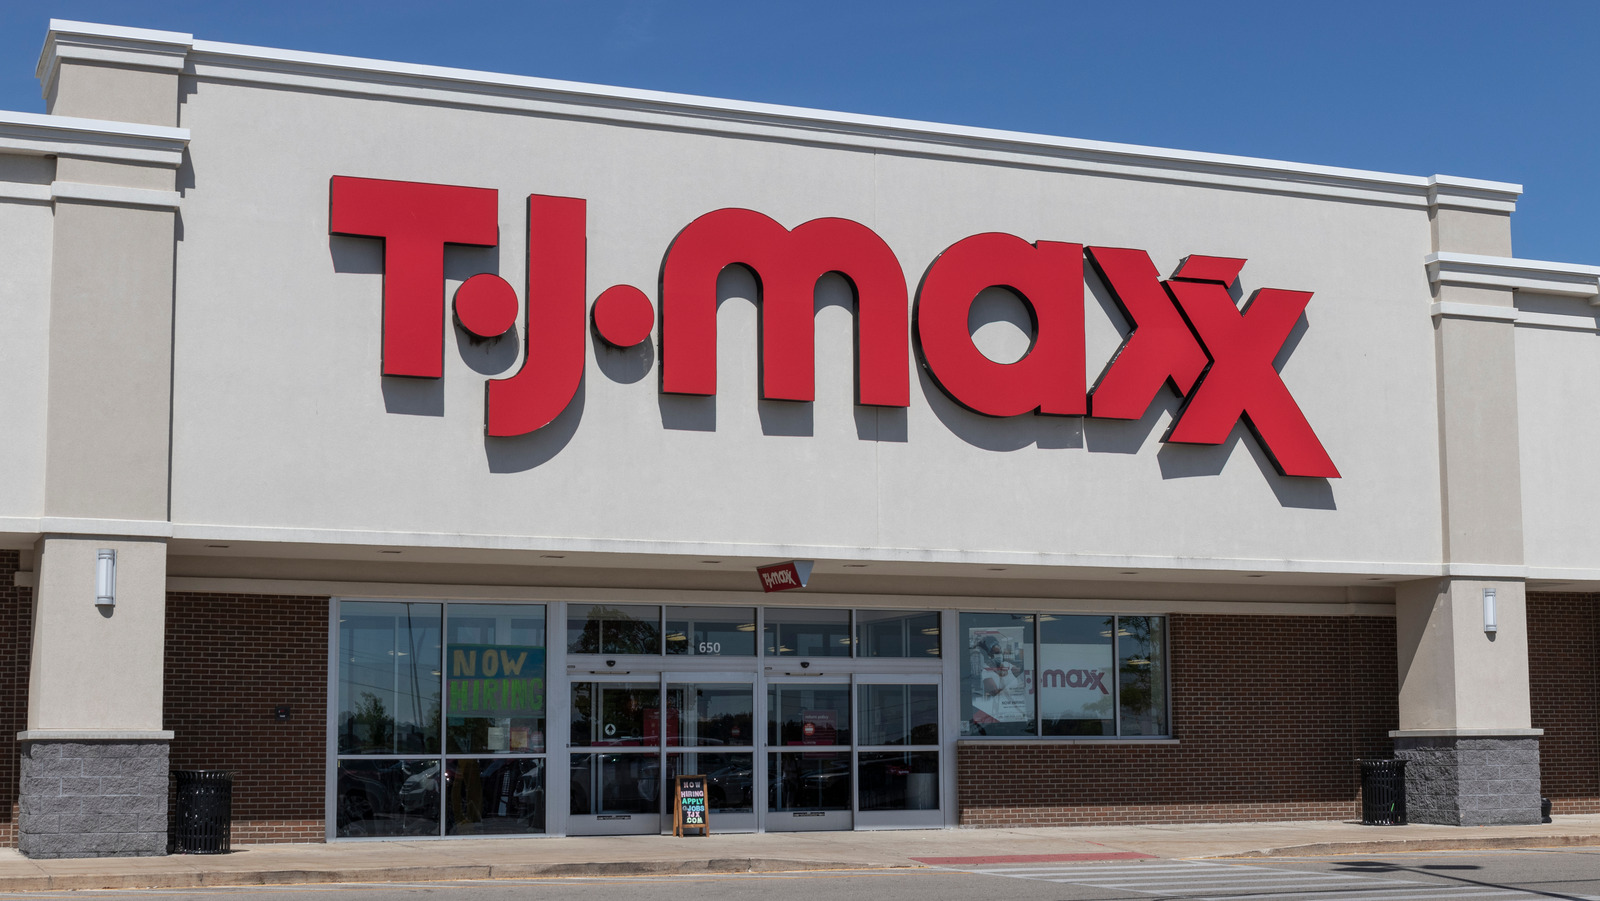 Must Have Buys from TJ MAXX - Showit Blog